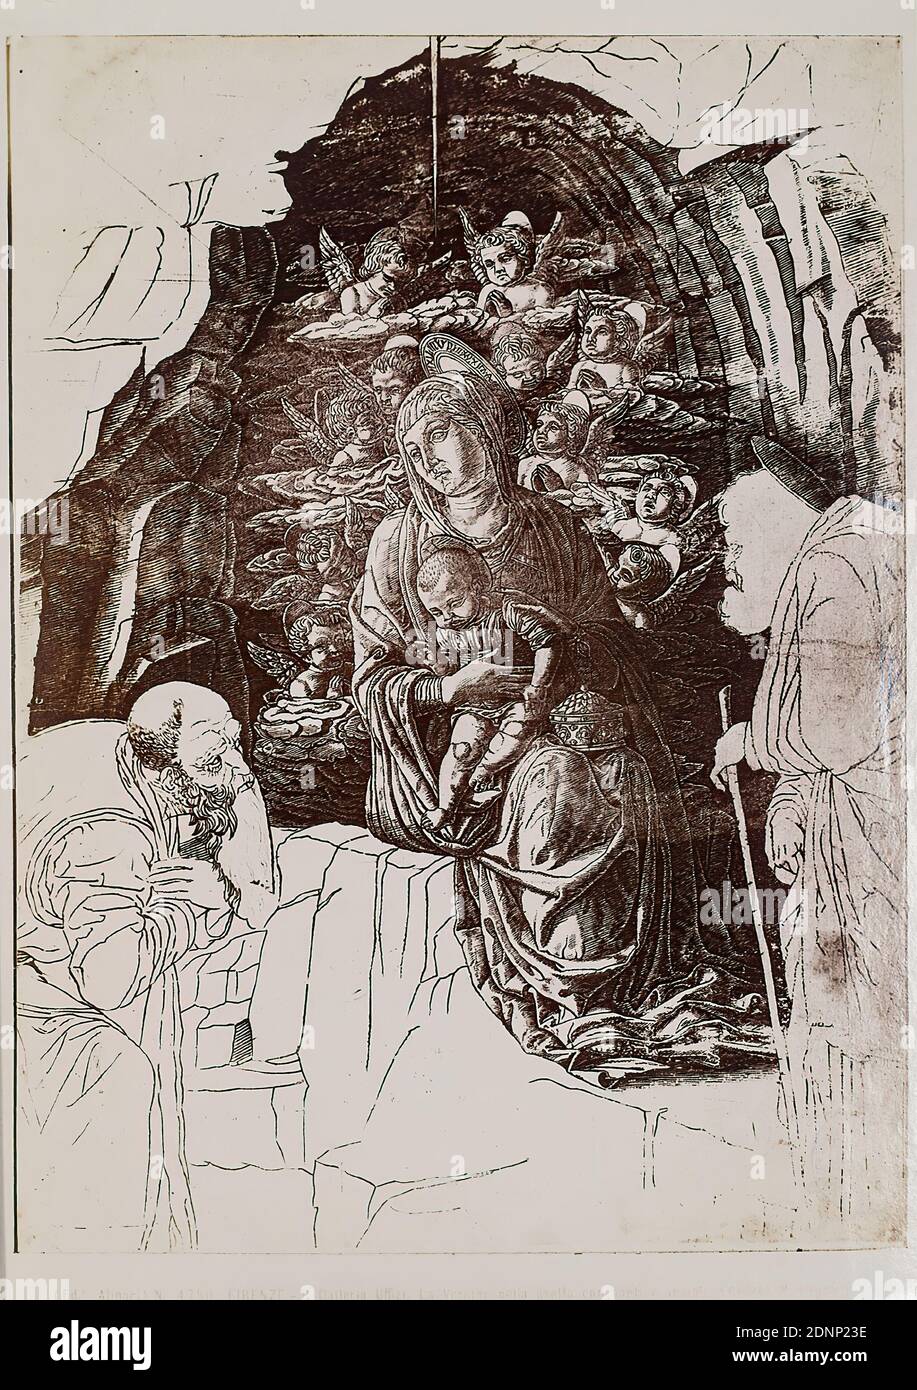 Madonna in the Grotto with Saints and Angels, Galleria degli Uffizi, Florence, albumin paper, black and white positive process, image size: height: 19,30 cm; width: 25,00 cm, title very pale and almost illegible copied below the photograph: P. 1. N°. 4750th FIRENZE - R. Galleria Uffizi. La Vergine nella grotta con santi e angeli. Verso round stamp, Mary with Christ Child (Madonna), art Stock Photo